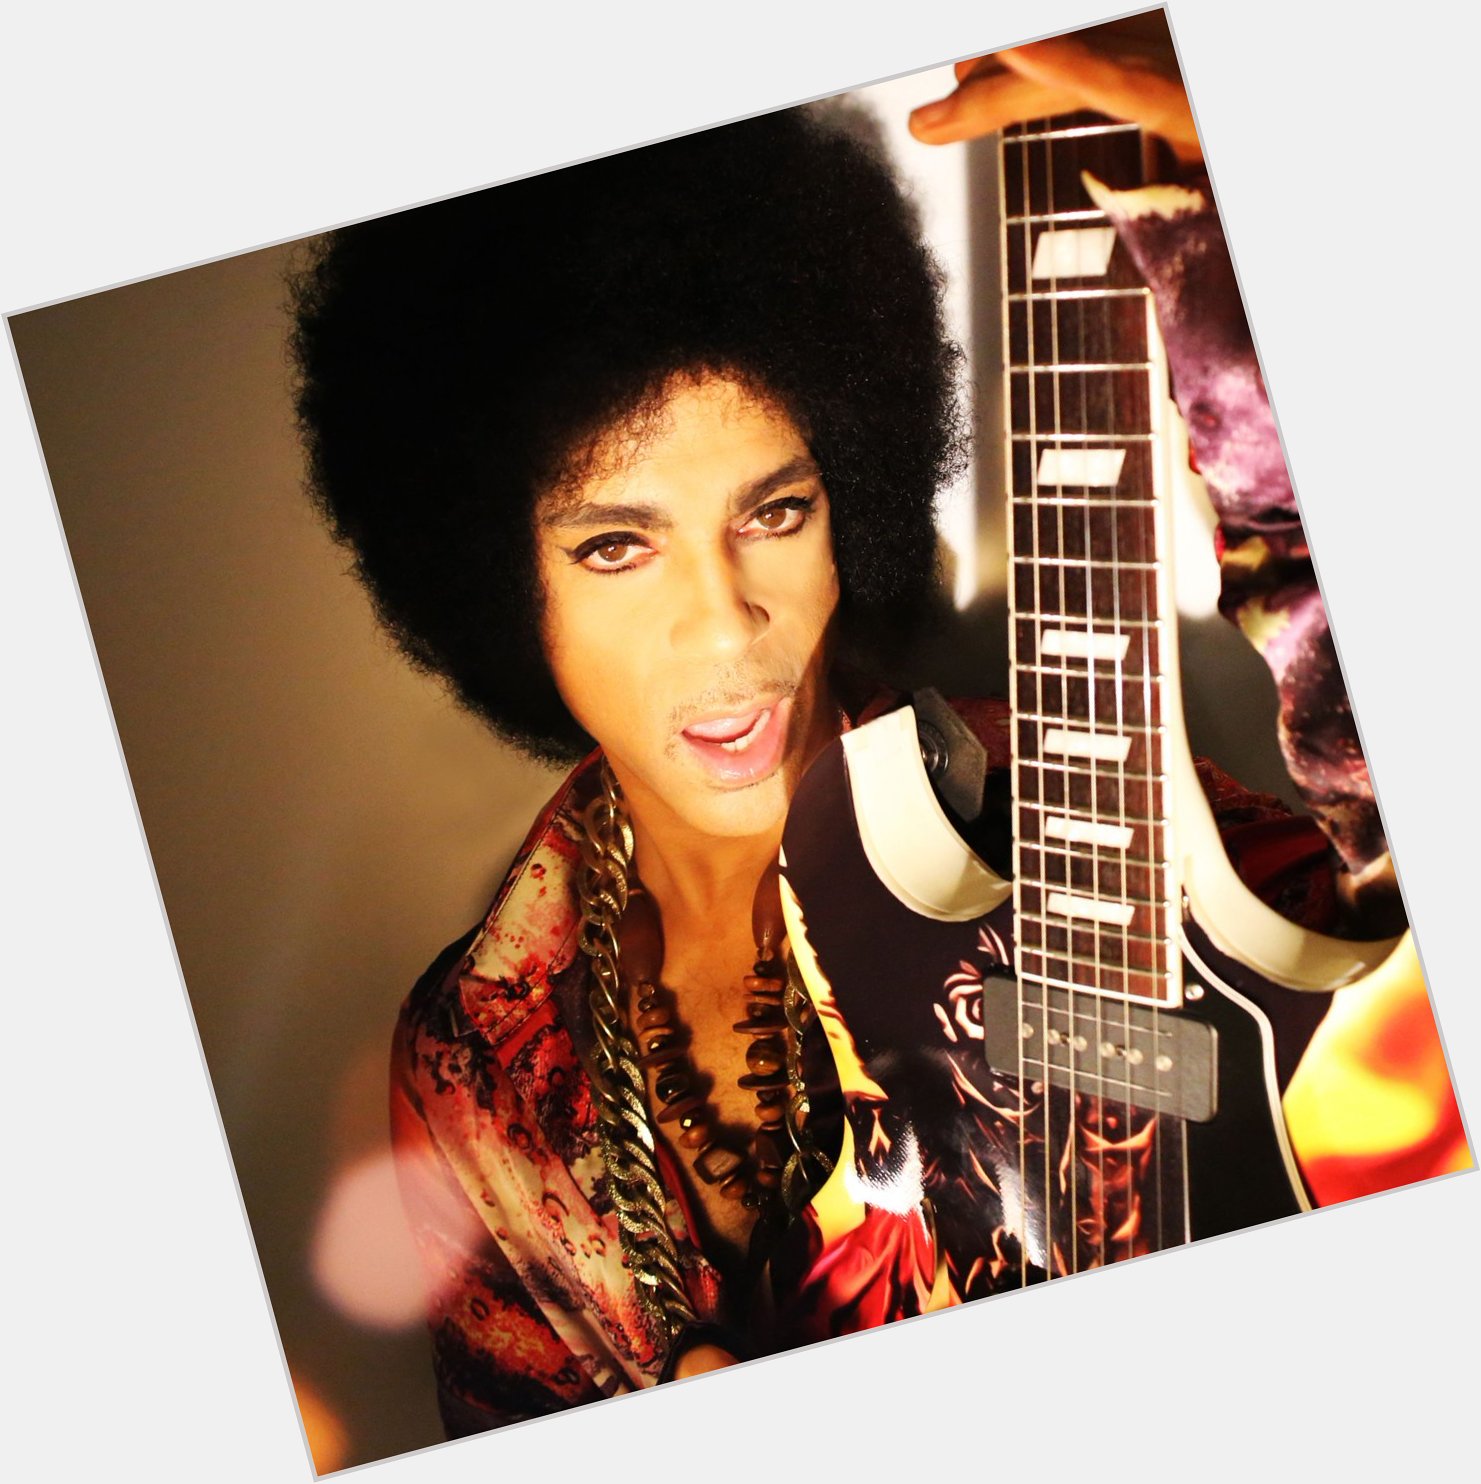 This image should come with a NSFW warning. Happy birthday, Prince! 